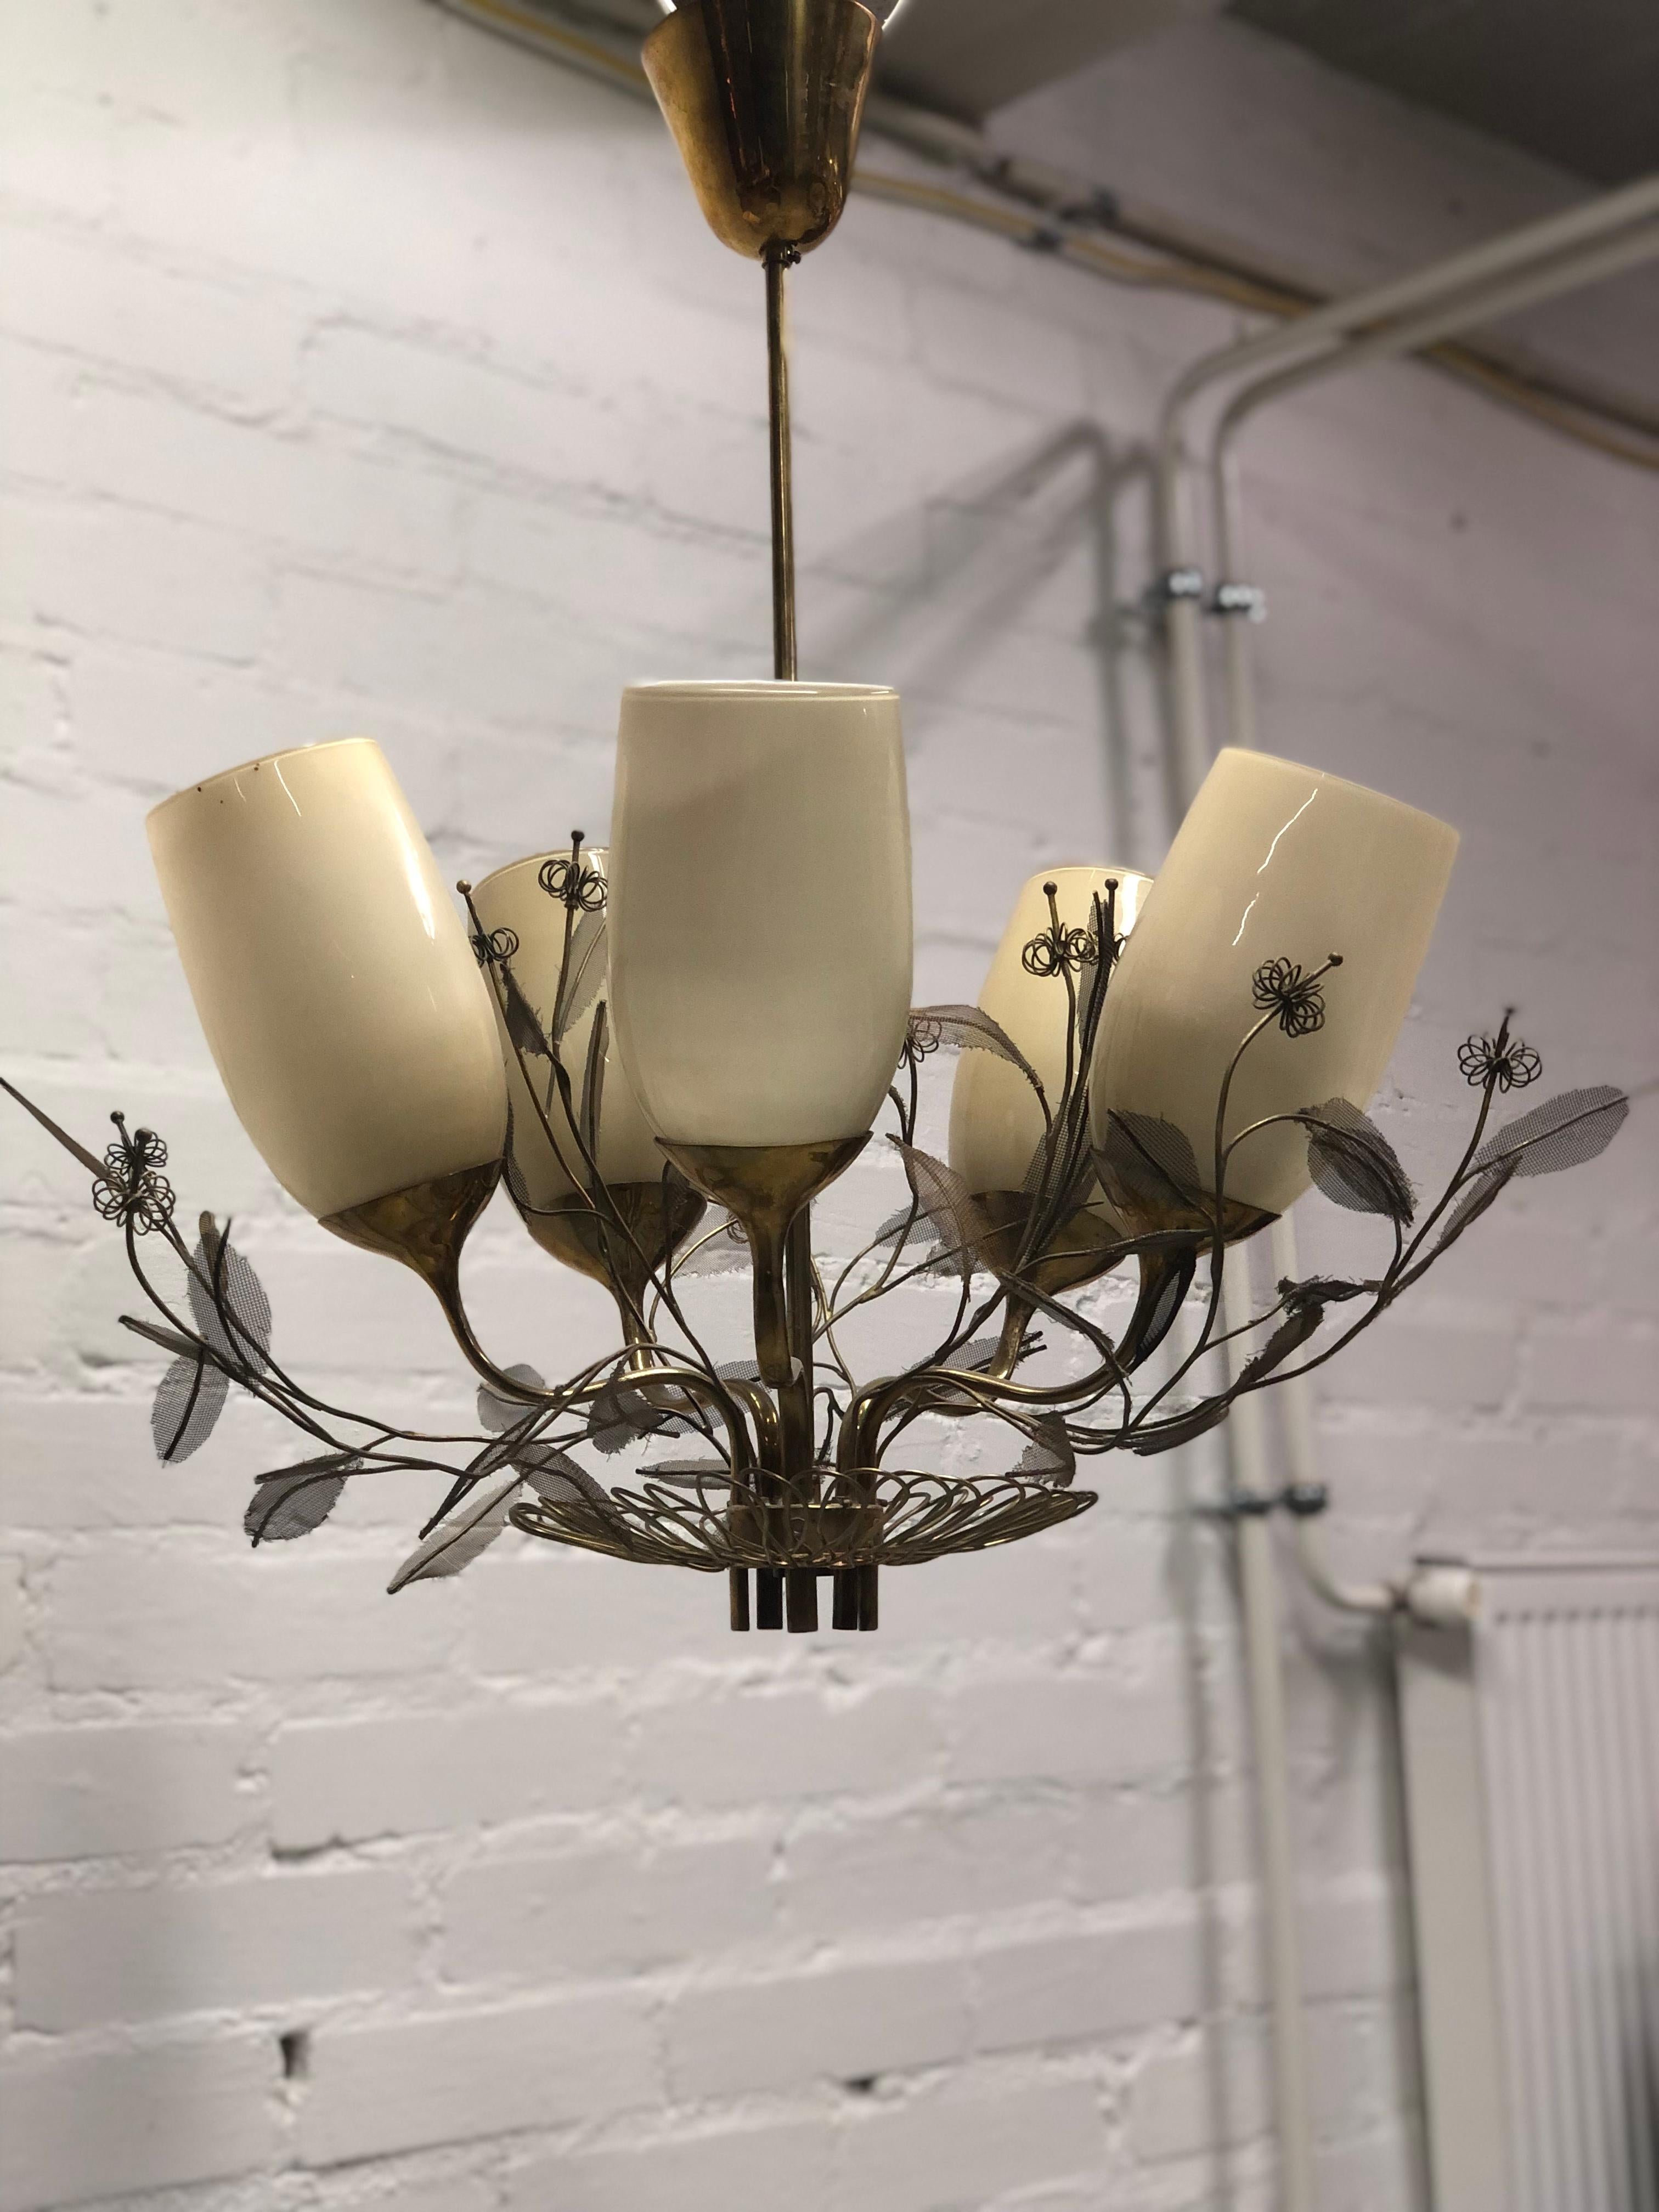 A special variation of the iconic 9029 chandelier with five beautiful light shades and a lot of brass decorations giving the impression of a flower bouque. Sometimes called the bridal bucket, this piece is certainly much more than just a lamp and